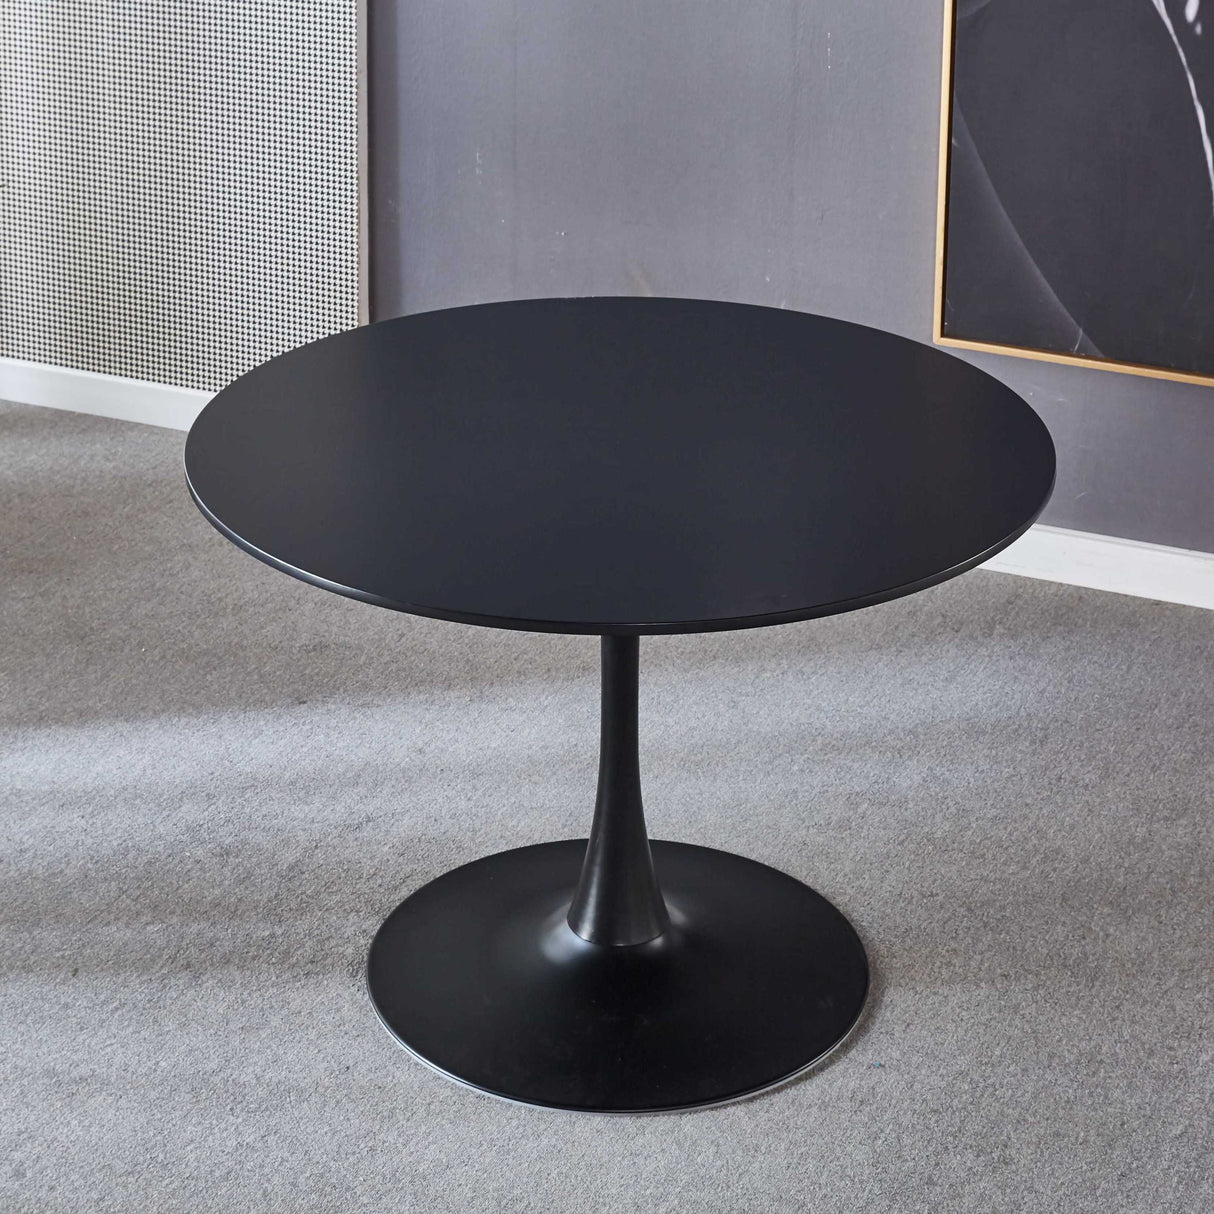 42.1"Black Tulip Table Mid-century Dining Table for 4-6 people With Round Mdf Table Top, Pedestal Dining Table, End Table Leisure Coffee Table - Home Elegance USA